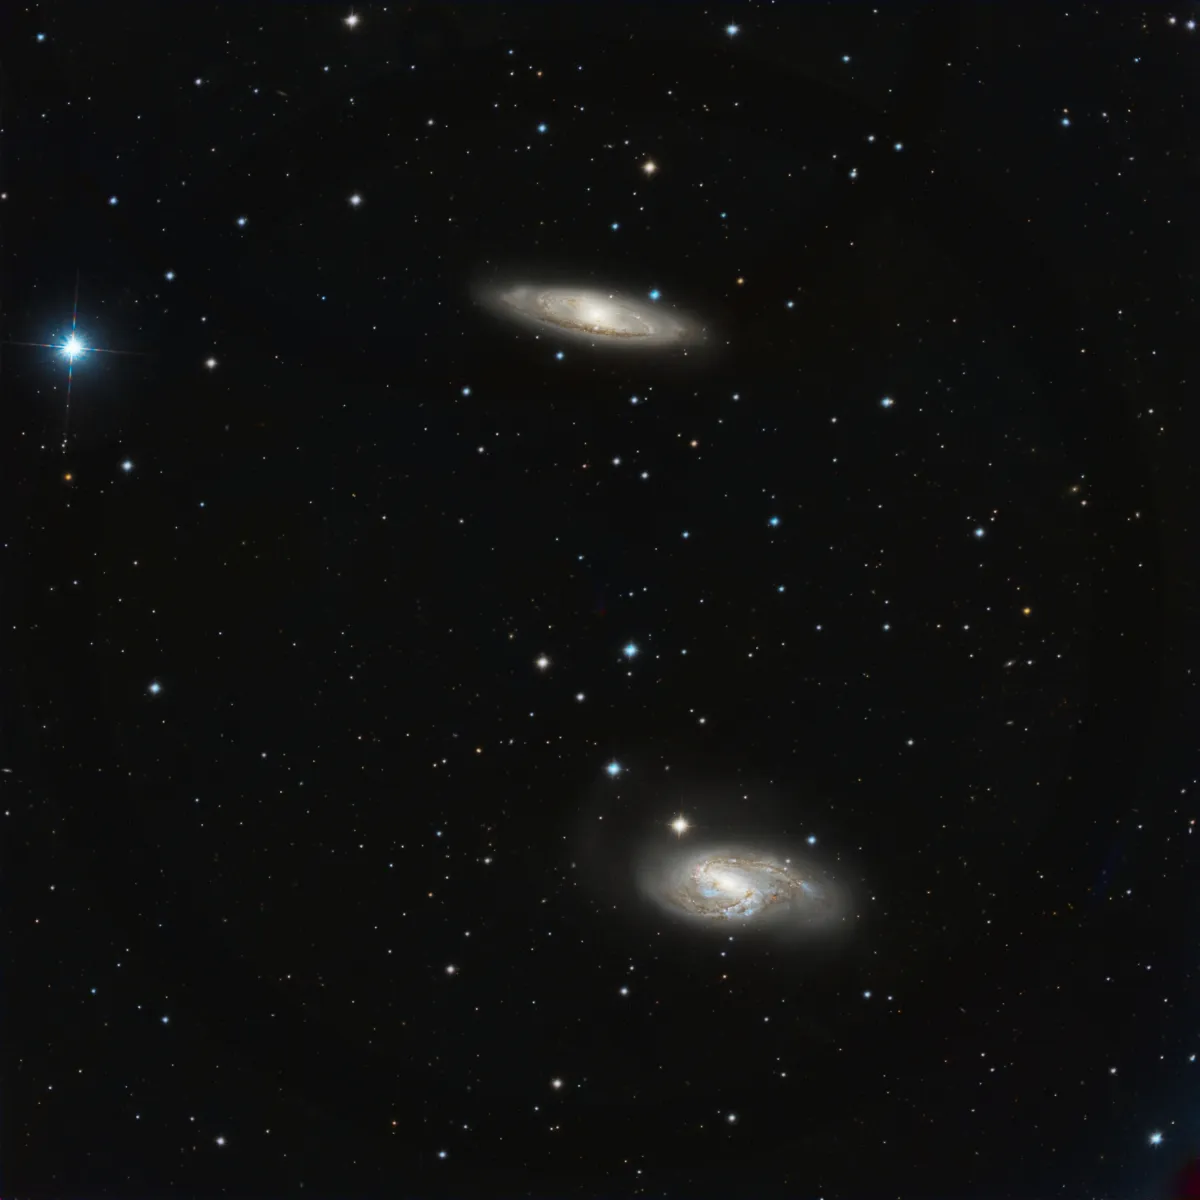 M 65 and M 66